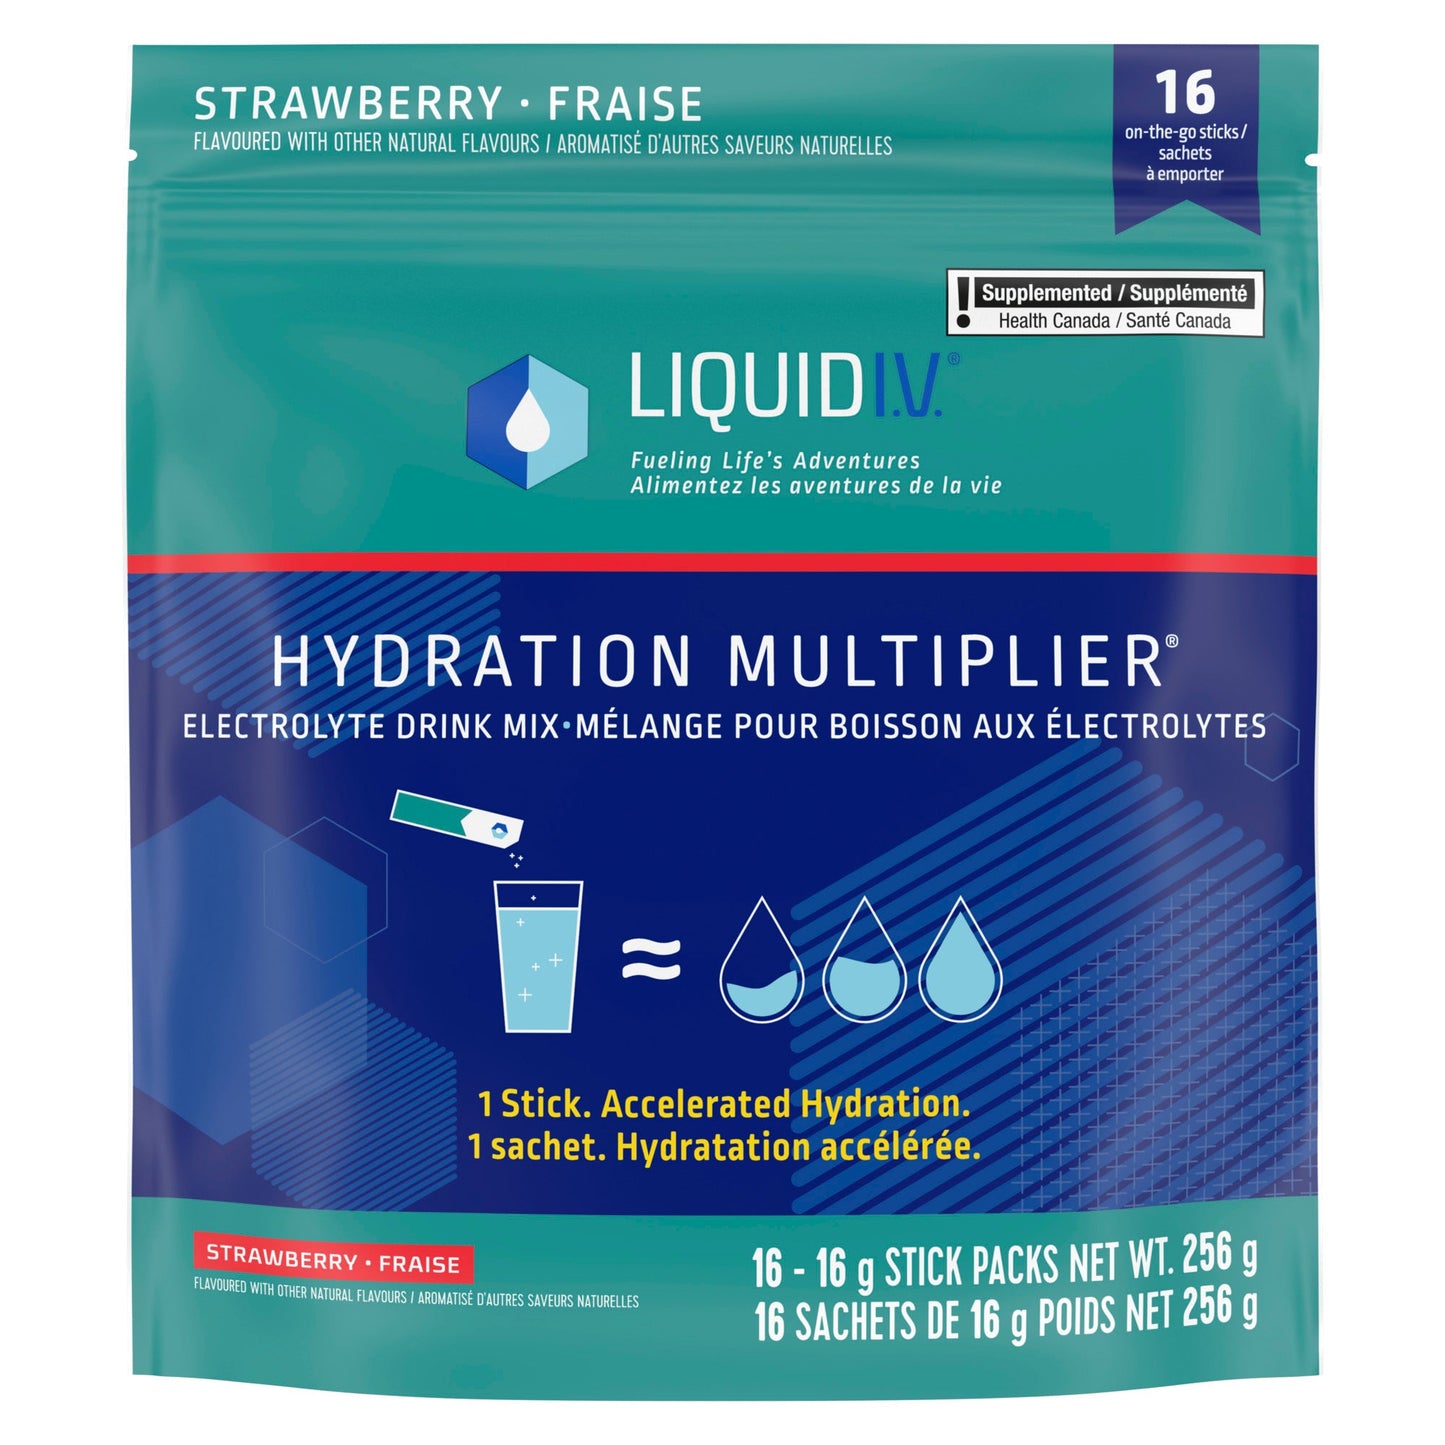 Showing the front angle view of the green & blue Liquid I.V. Hydration Multiplier Strawberry product packaging.